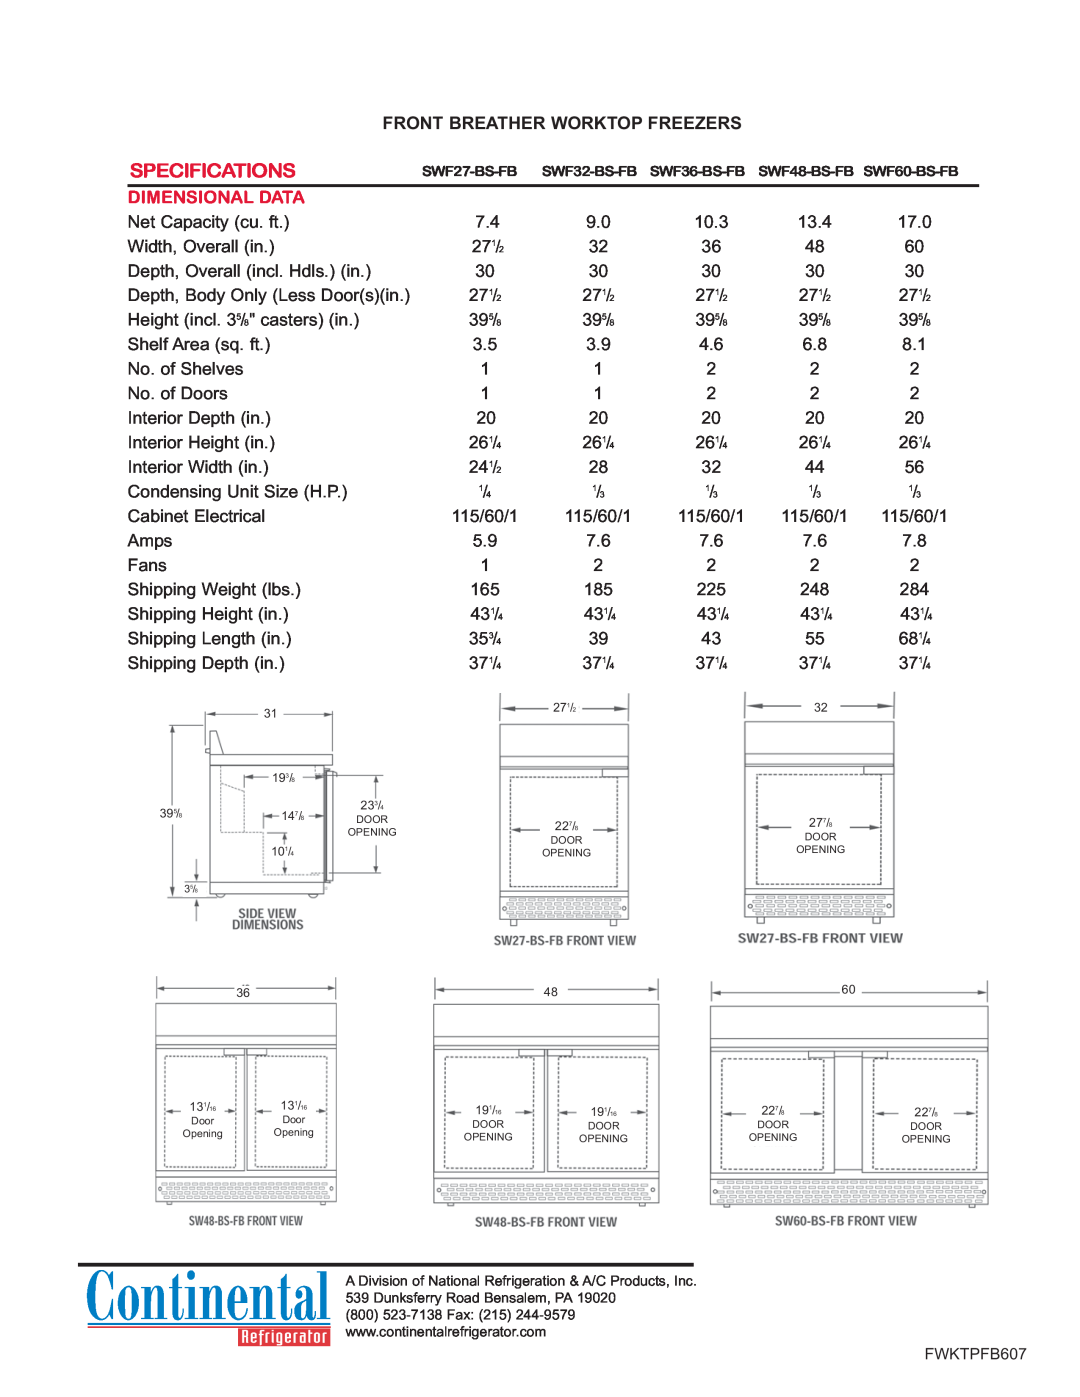 Continental Refrigerator SWF27-BS-FB, SWF36-BS-FB manual Front Breather Worktop Freezers, Specifications, Dimensional Data 